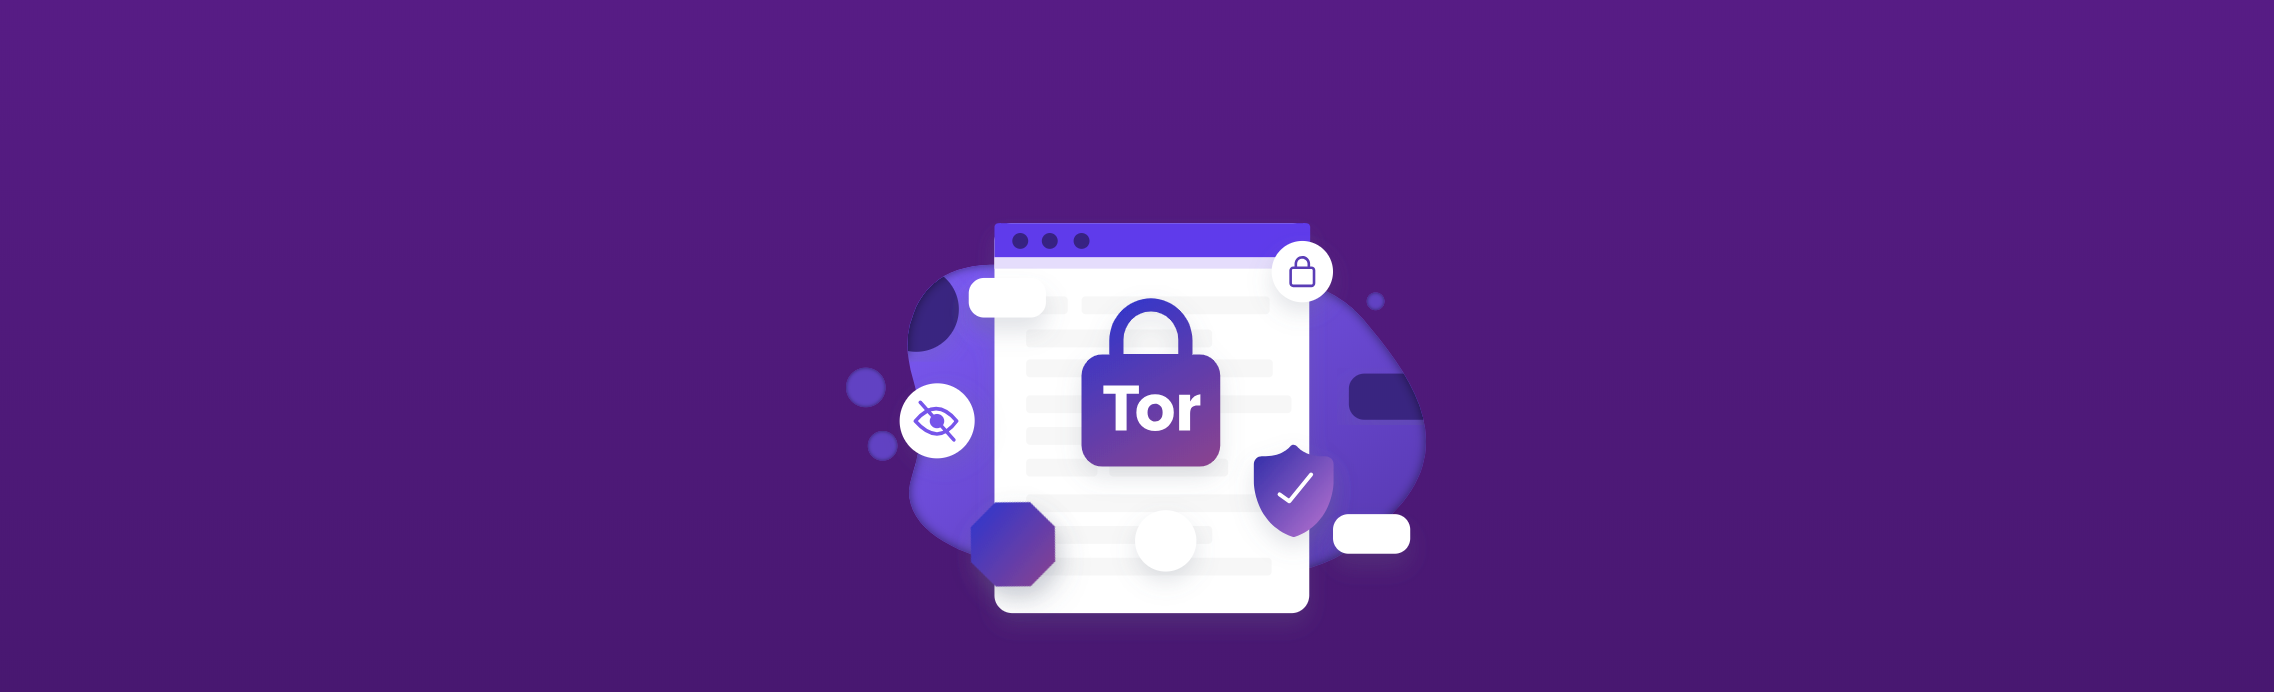 How to Anonymously Access Content on the Internet with Tor 11